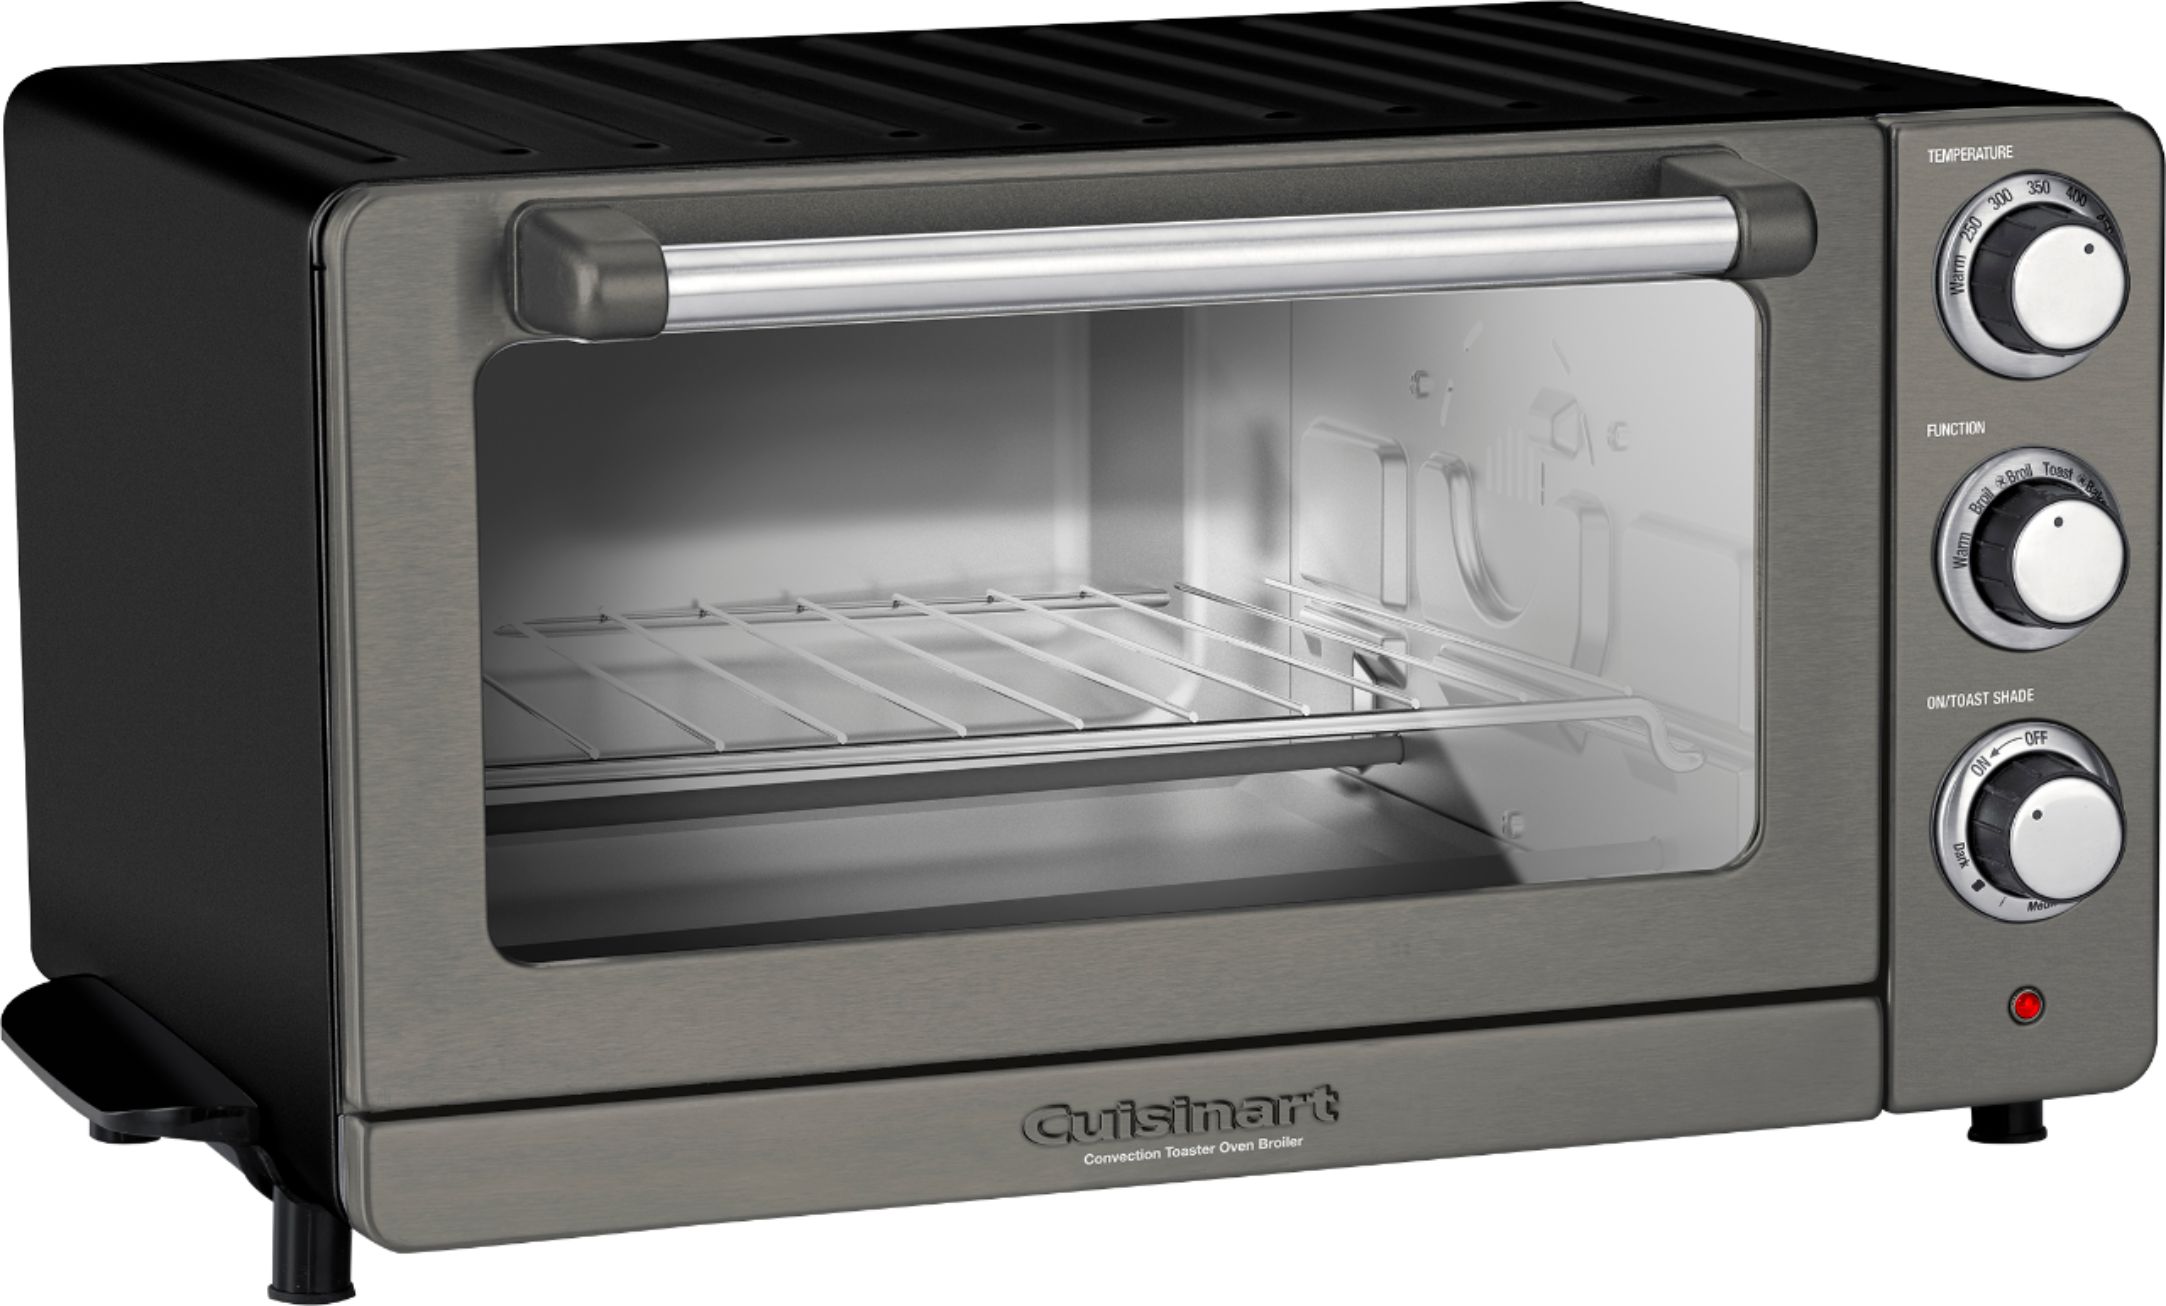 My New Cuisinart Microwave/Convection Oven is on Sale!Commuter